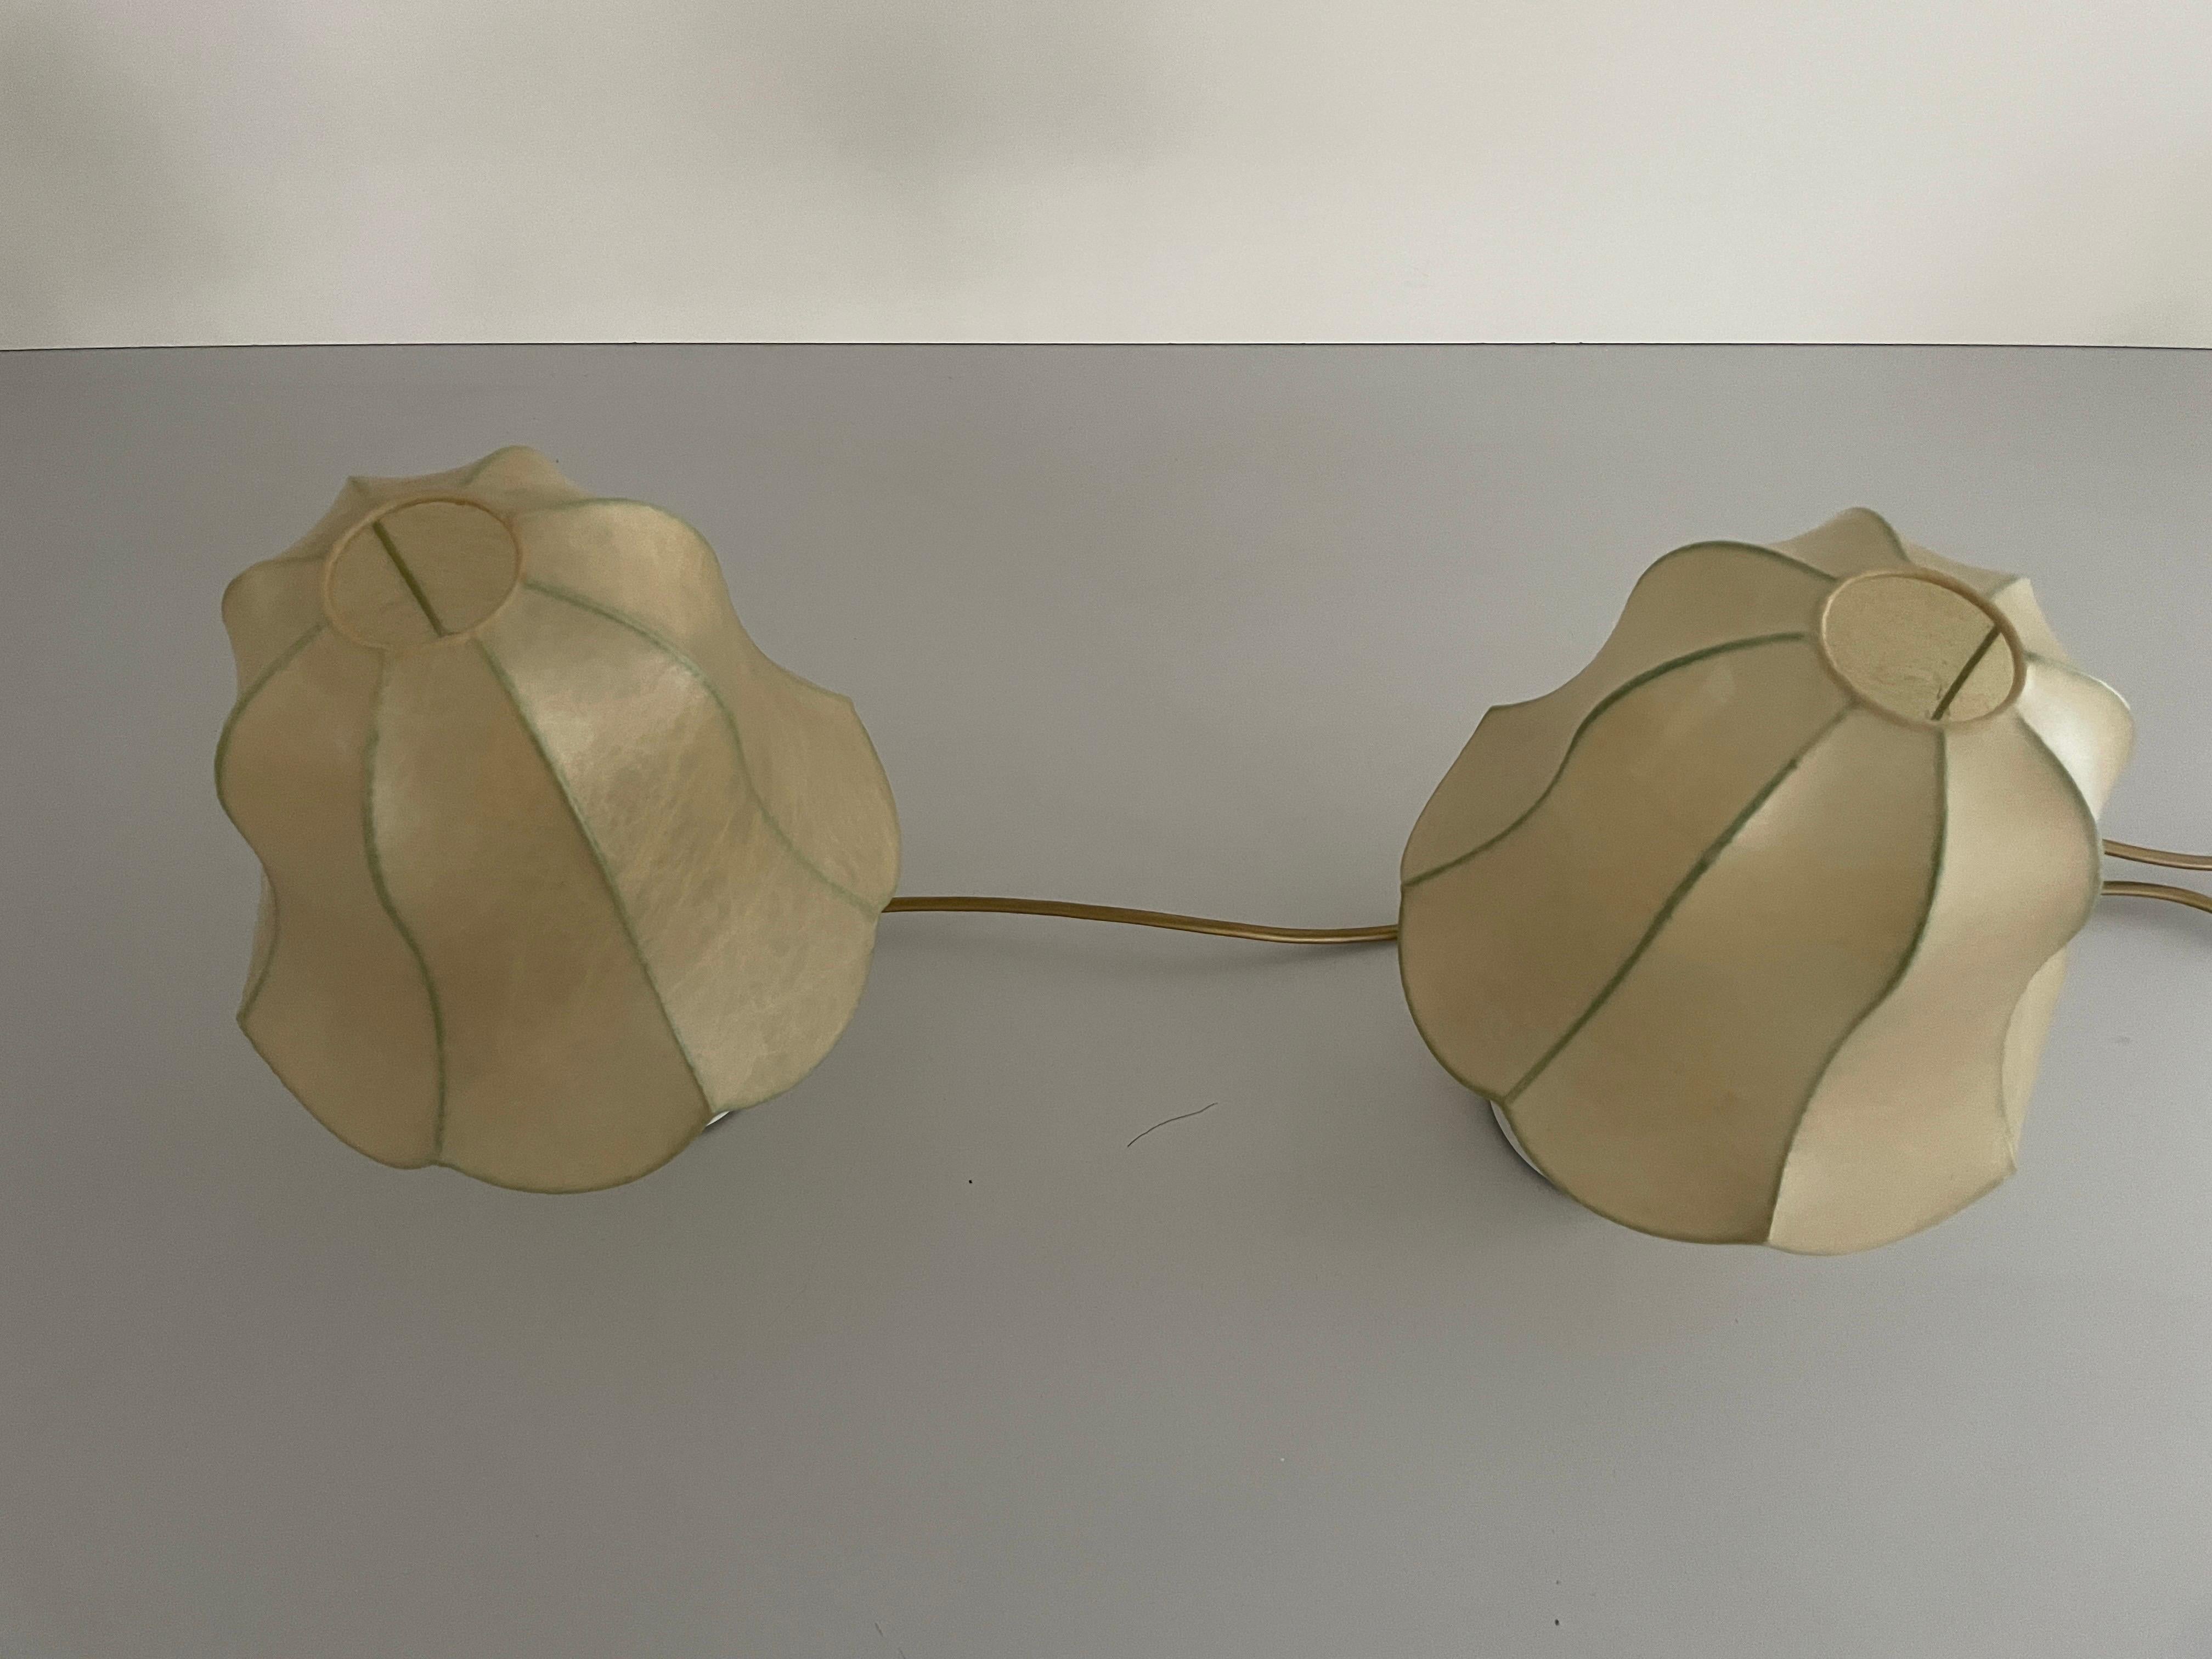 Cocoon Shade Metal Body Pair of Bedside Lamps by GOLDKANT, 1970s, Germany For Sale 1